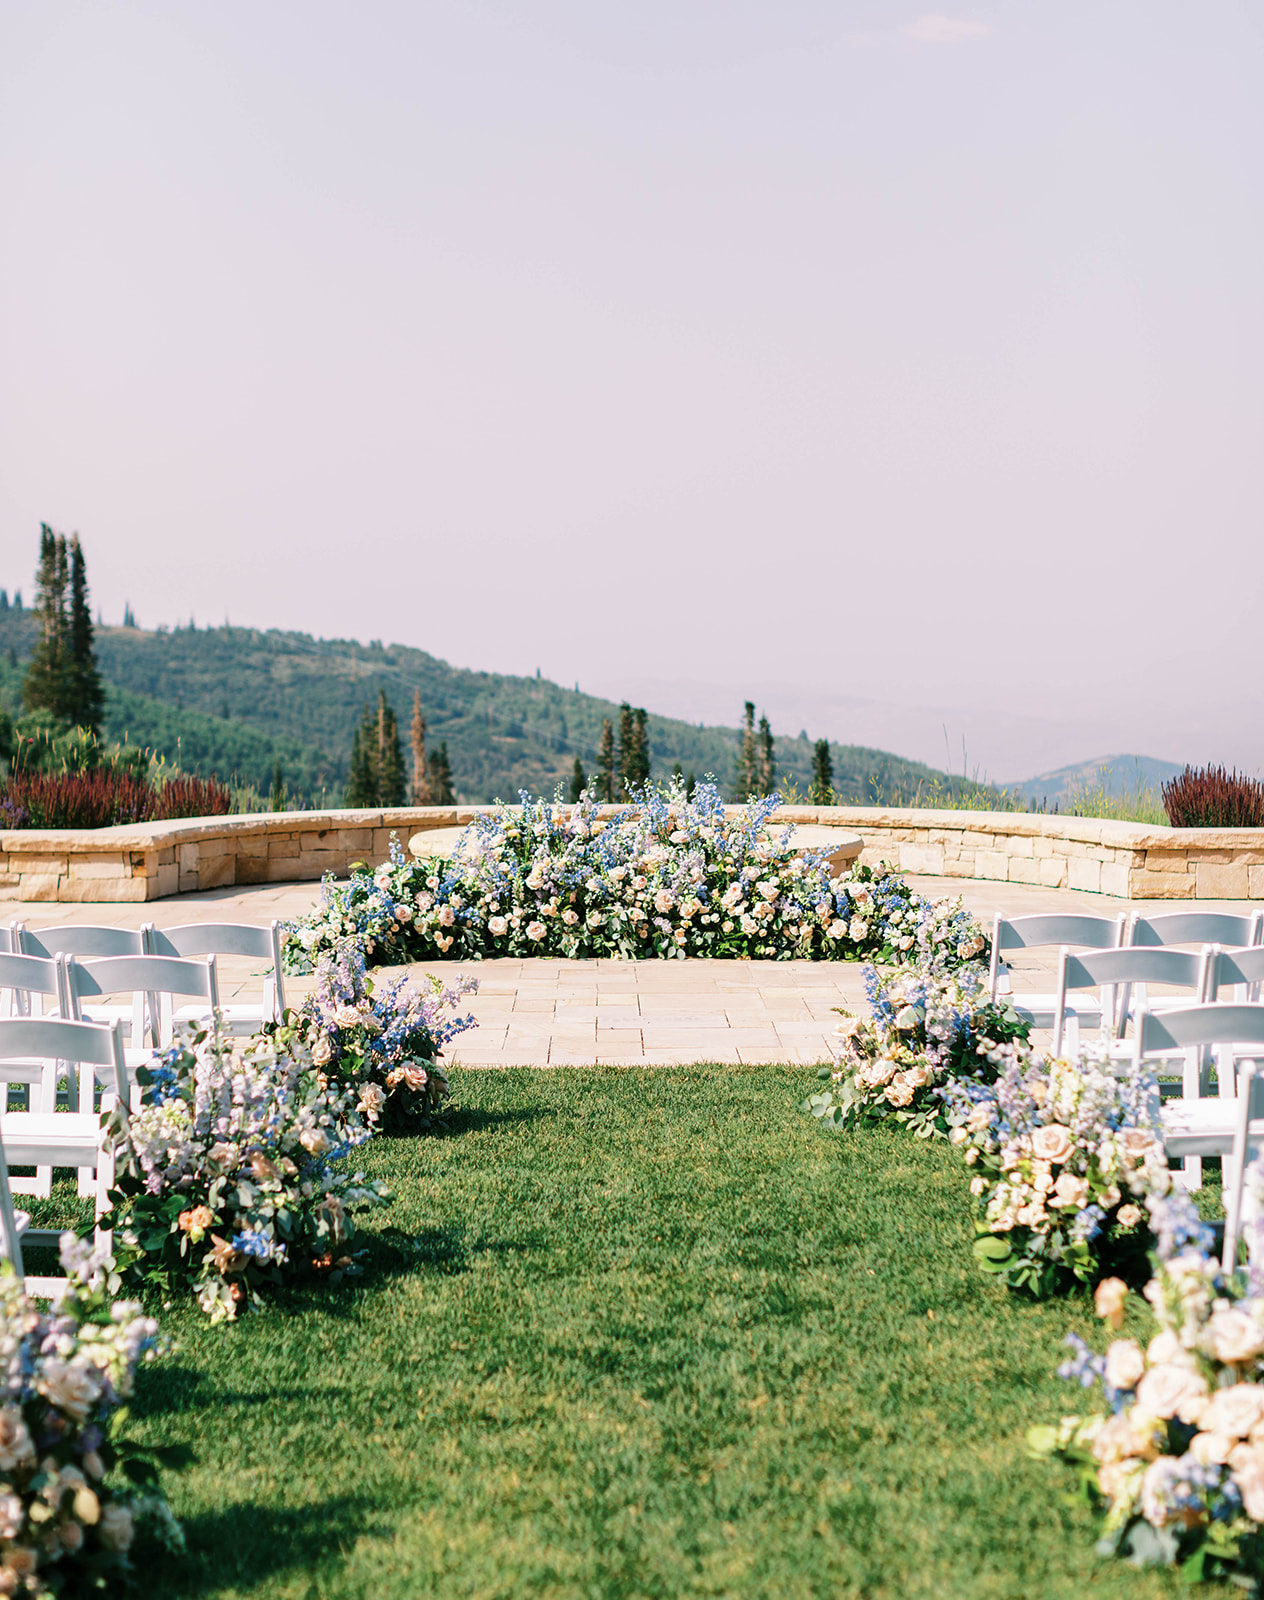 garden party wedding ceremony flowers at a montage deer valley resort wedding in park city utah. photo by megan robinson photography